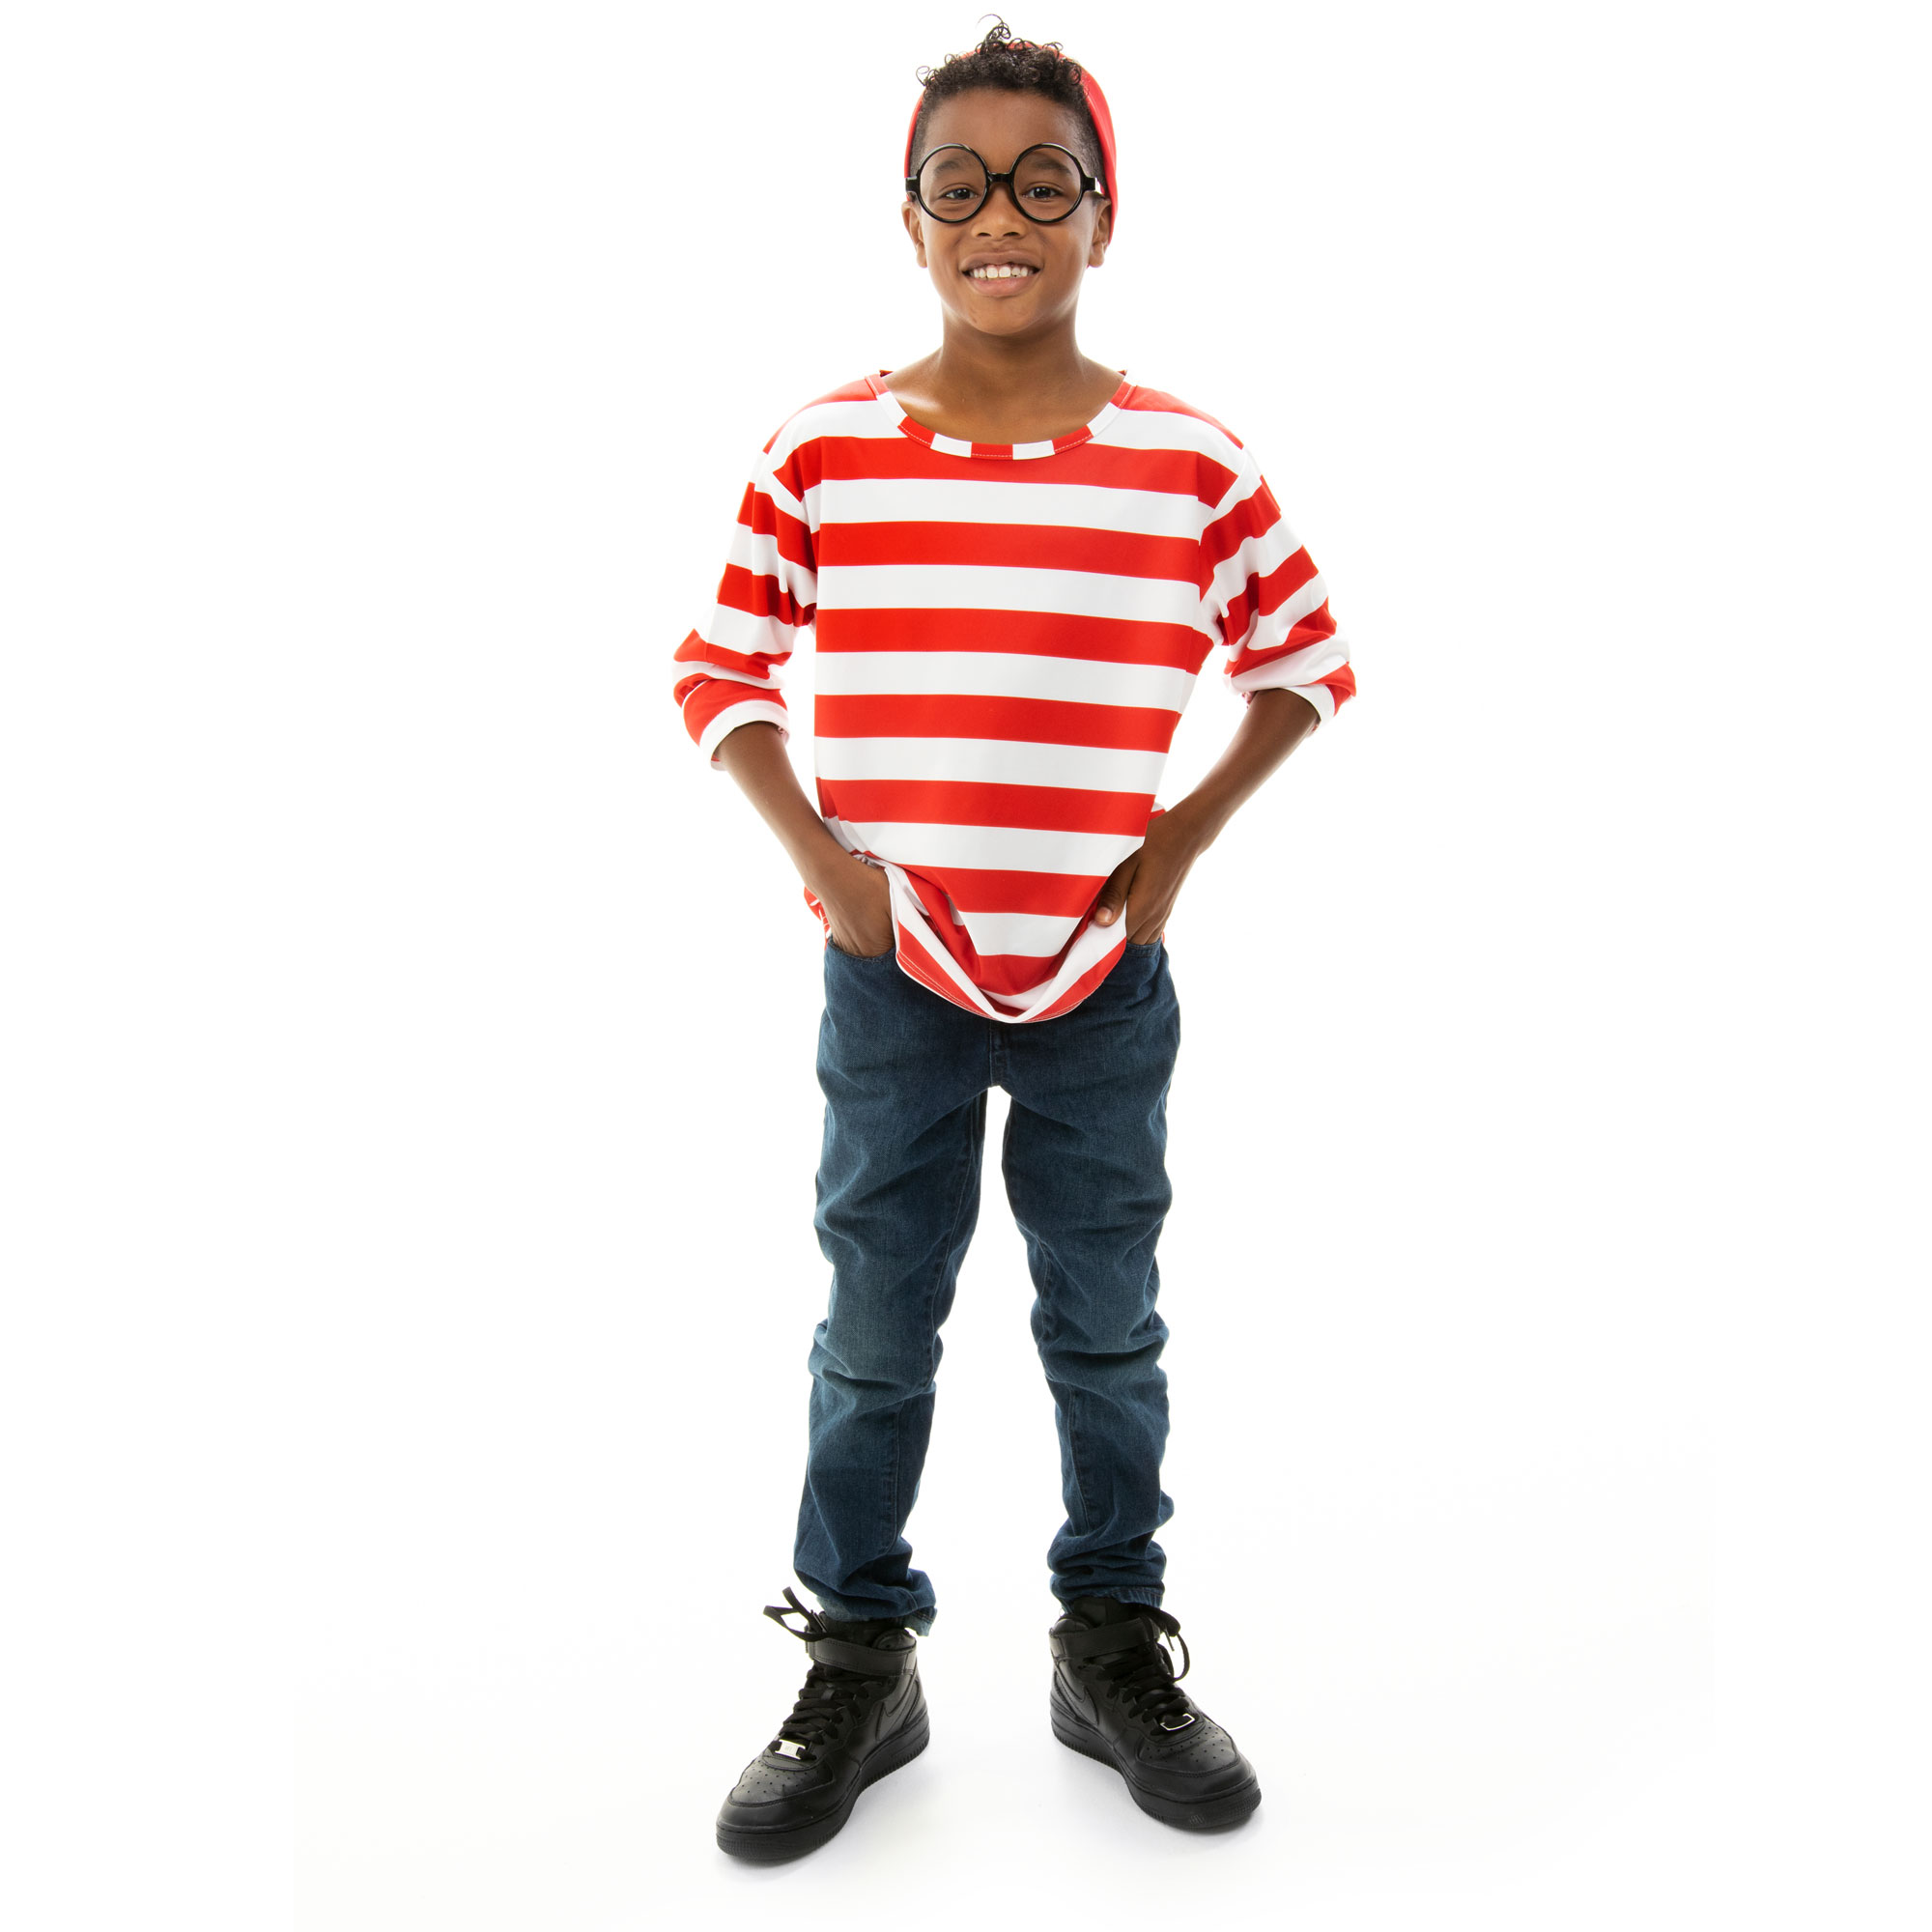 Where's Wally Halloween Costume - Child's Cosplay Outfit, S